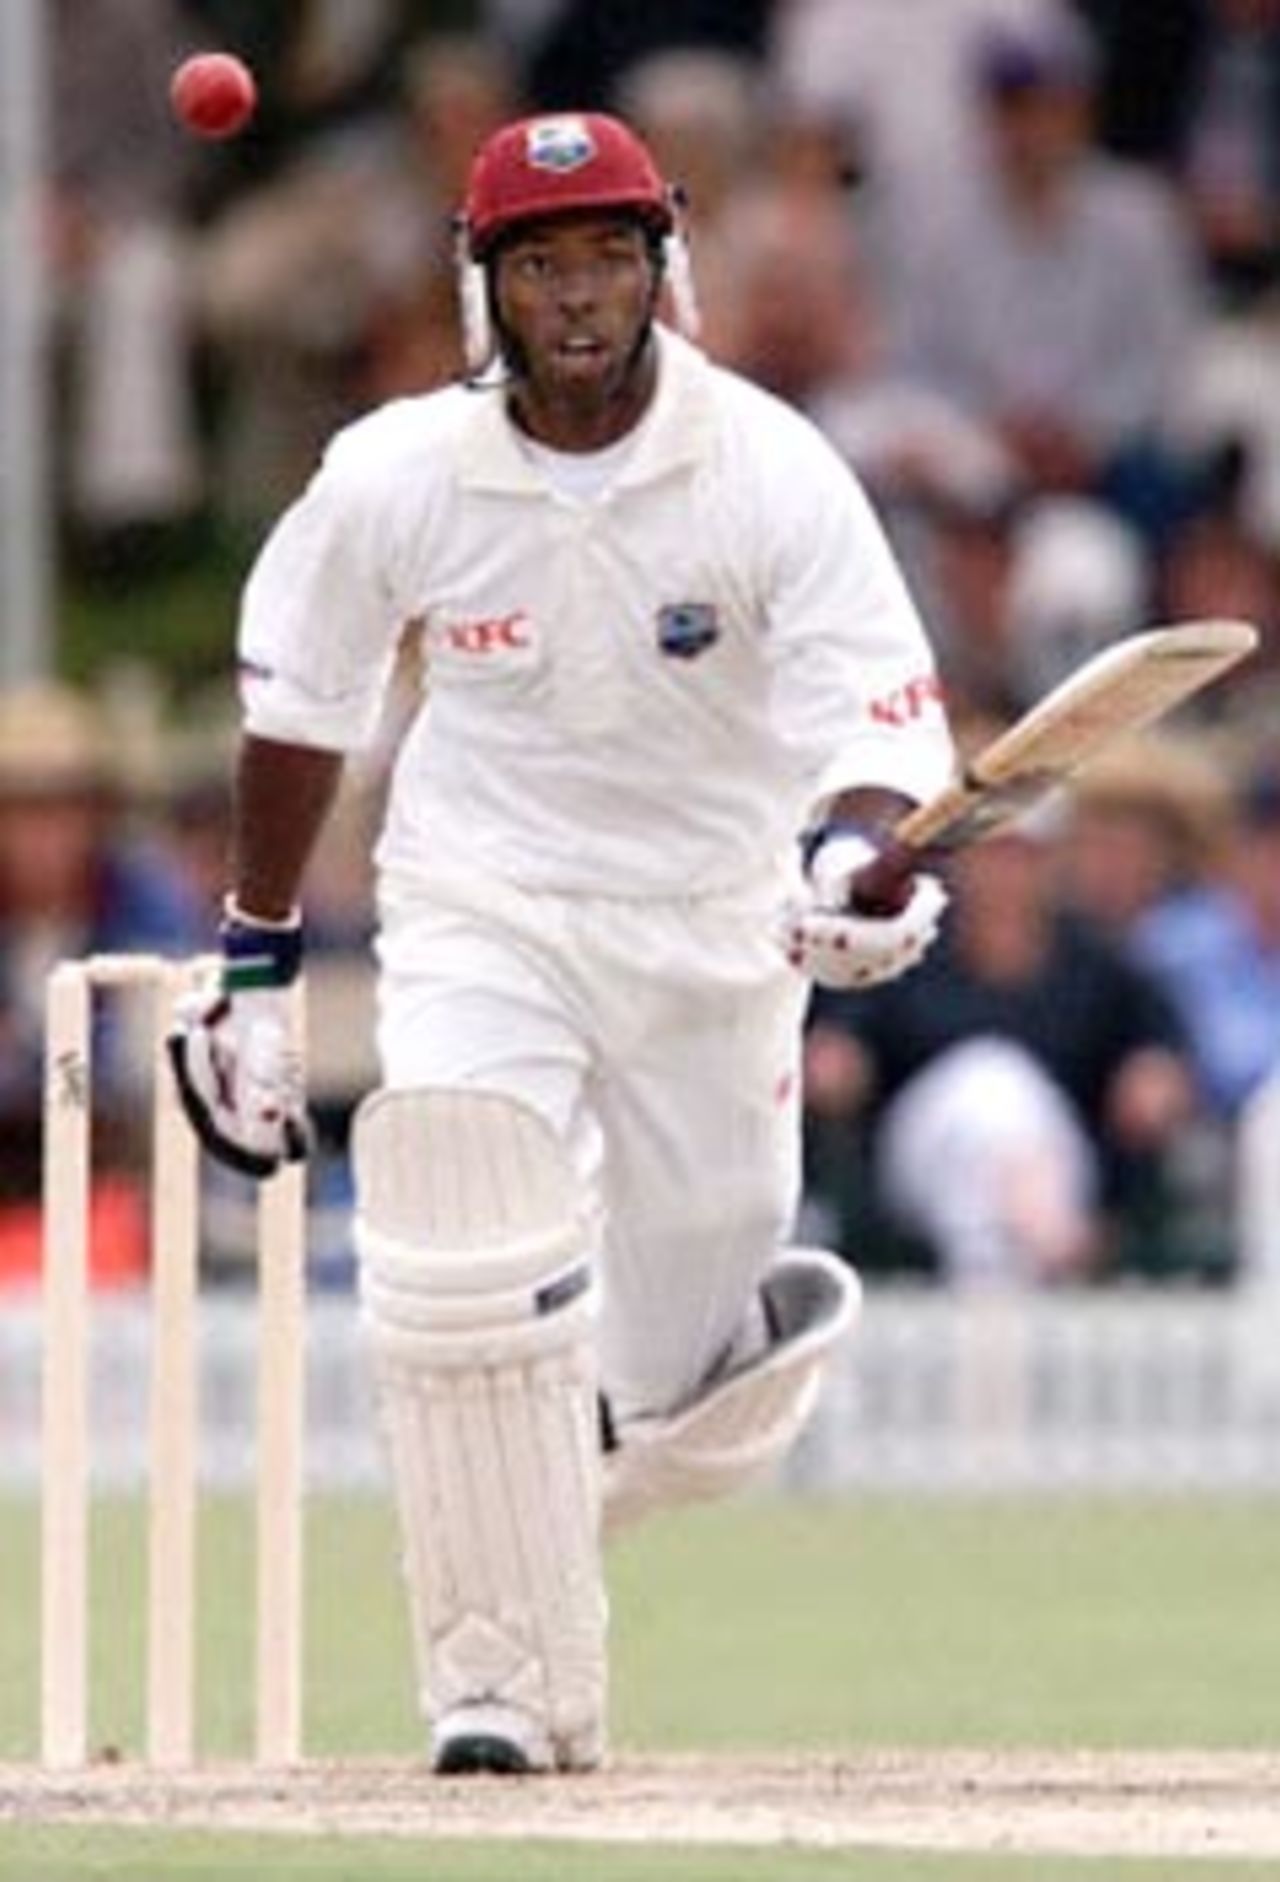 Batsman Sherwin Campbell of the West Indies, watches the flight of the ball after playing a shot during an exhibition match at Lilac Hill near Perth, 07 November 2000. The match is being played between the West Indies test side and the Australian Cricket Board Chairman's X1 and is the touring sides first official fixture. Vice-captain Campbell finished on 111 not out, with the West-Indies 2 for 276 after their 50 overs.